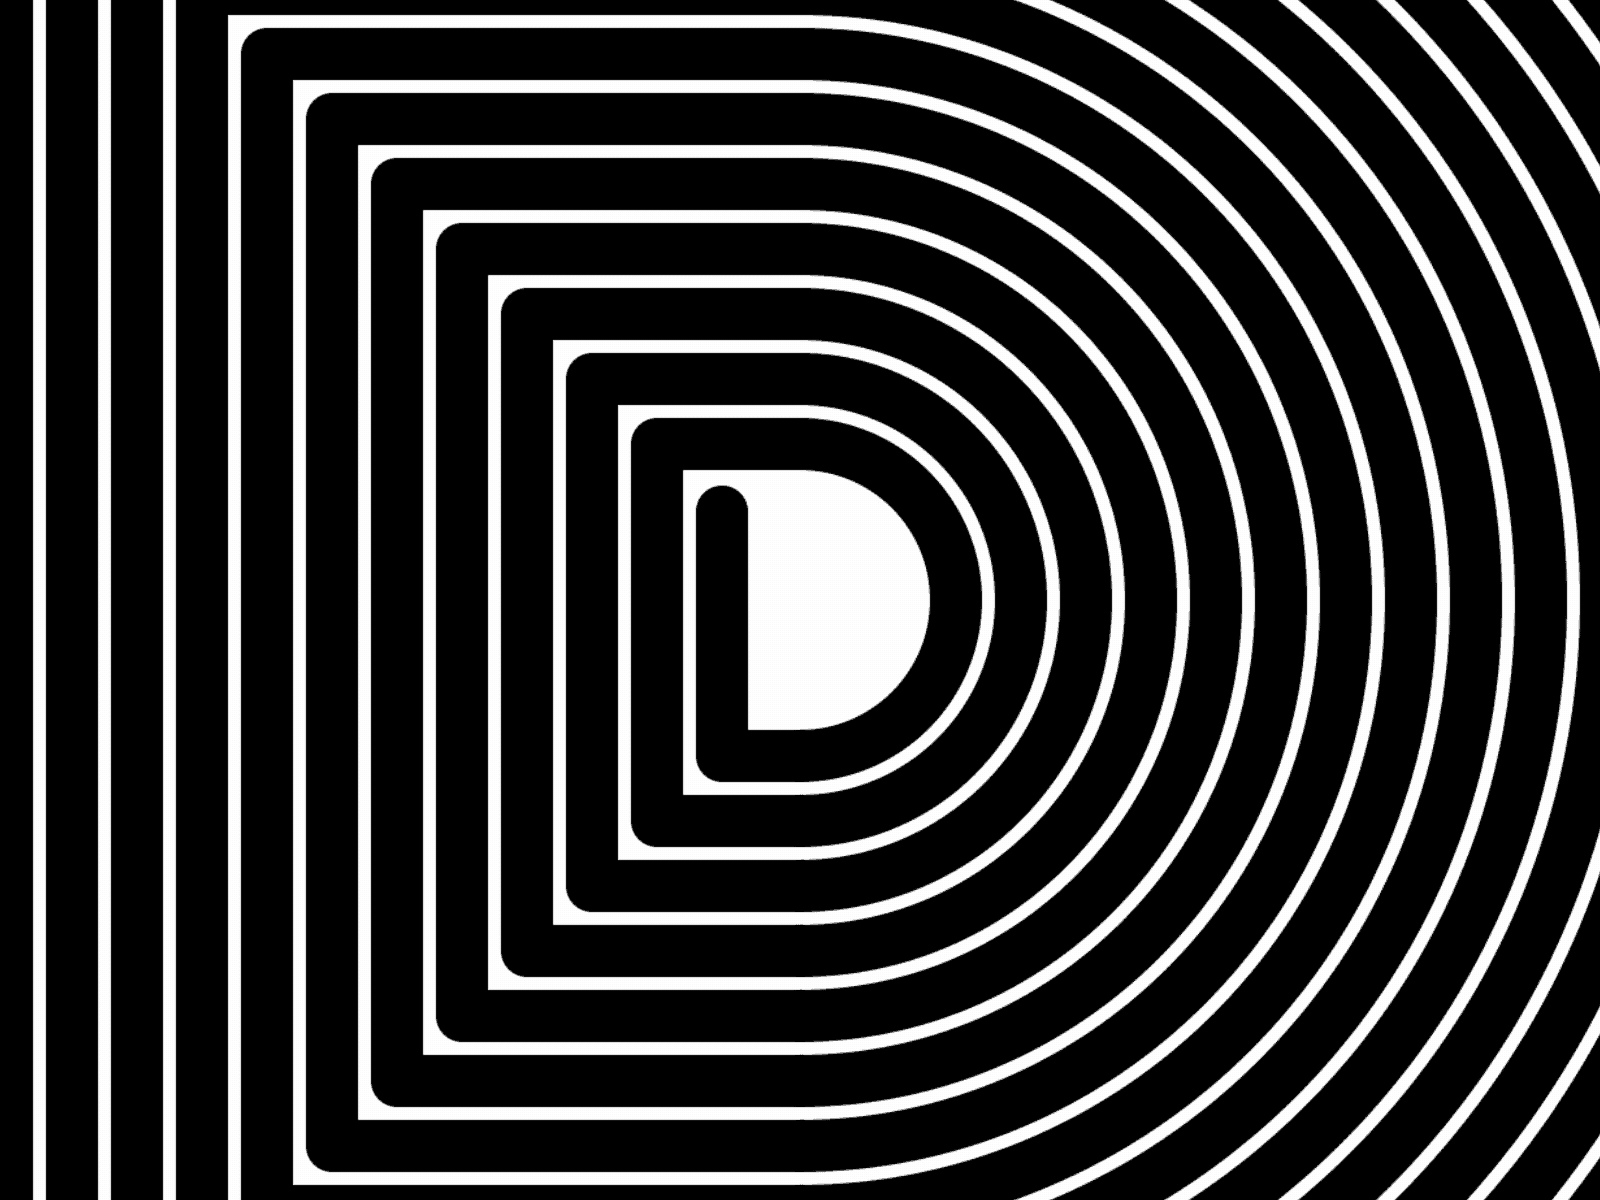 36 Days of Type 2021 - D 2d 36 days of type 36daysoftype after effects animated gif animation gif loop